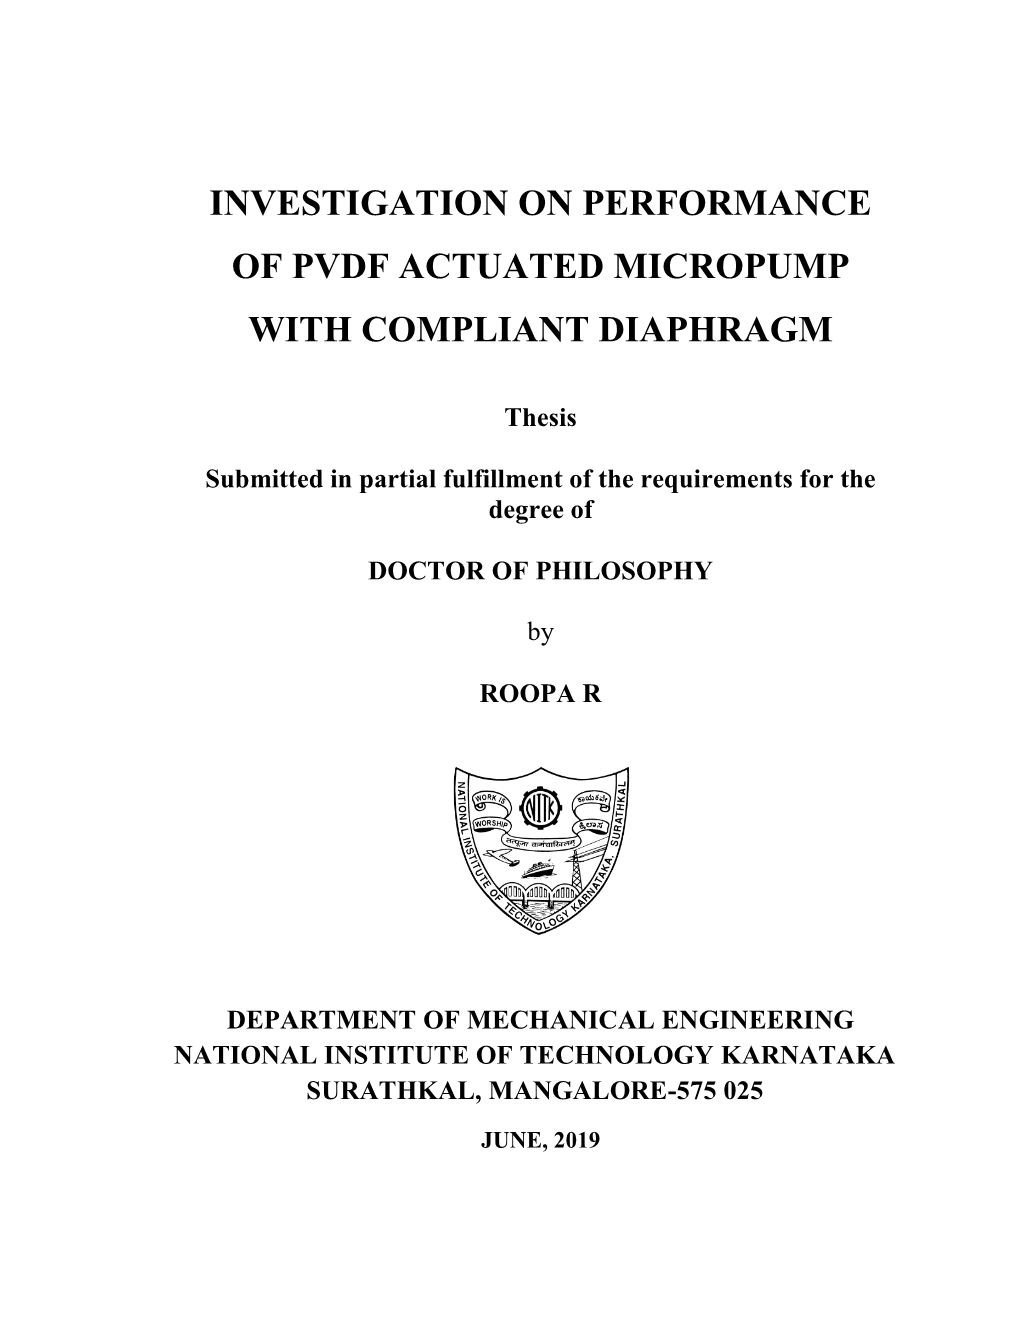 Investigation on Performance of Pvdf Actuated Micropump with Compliant Diaphragm